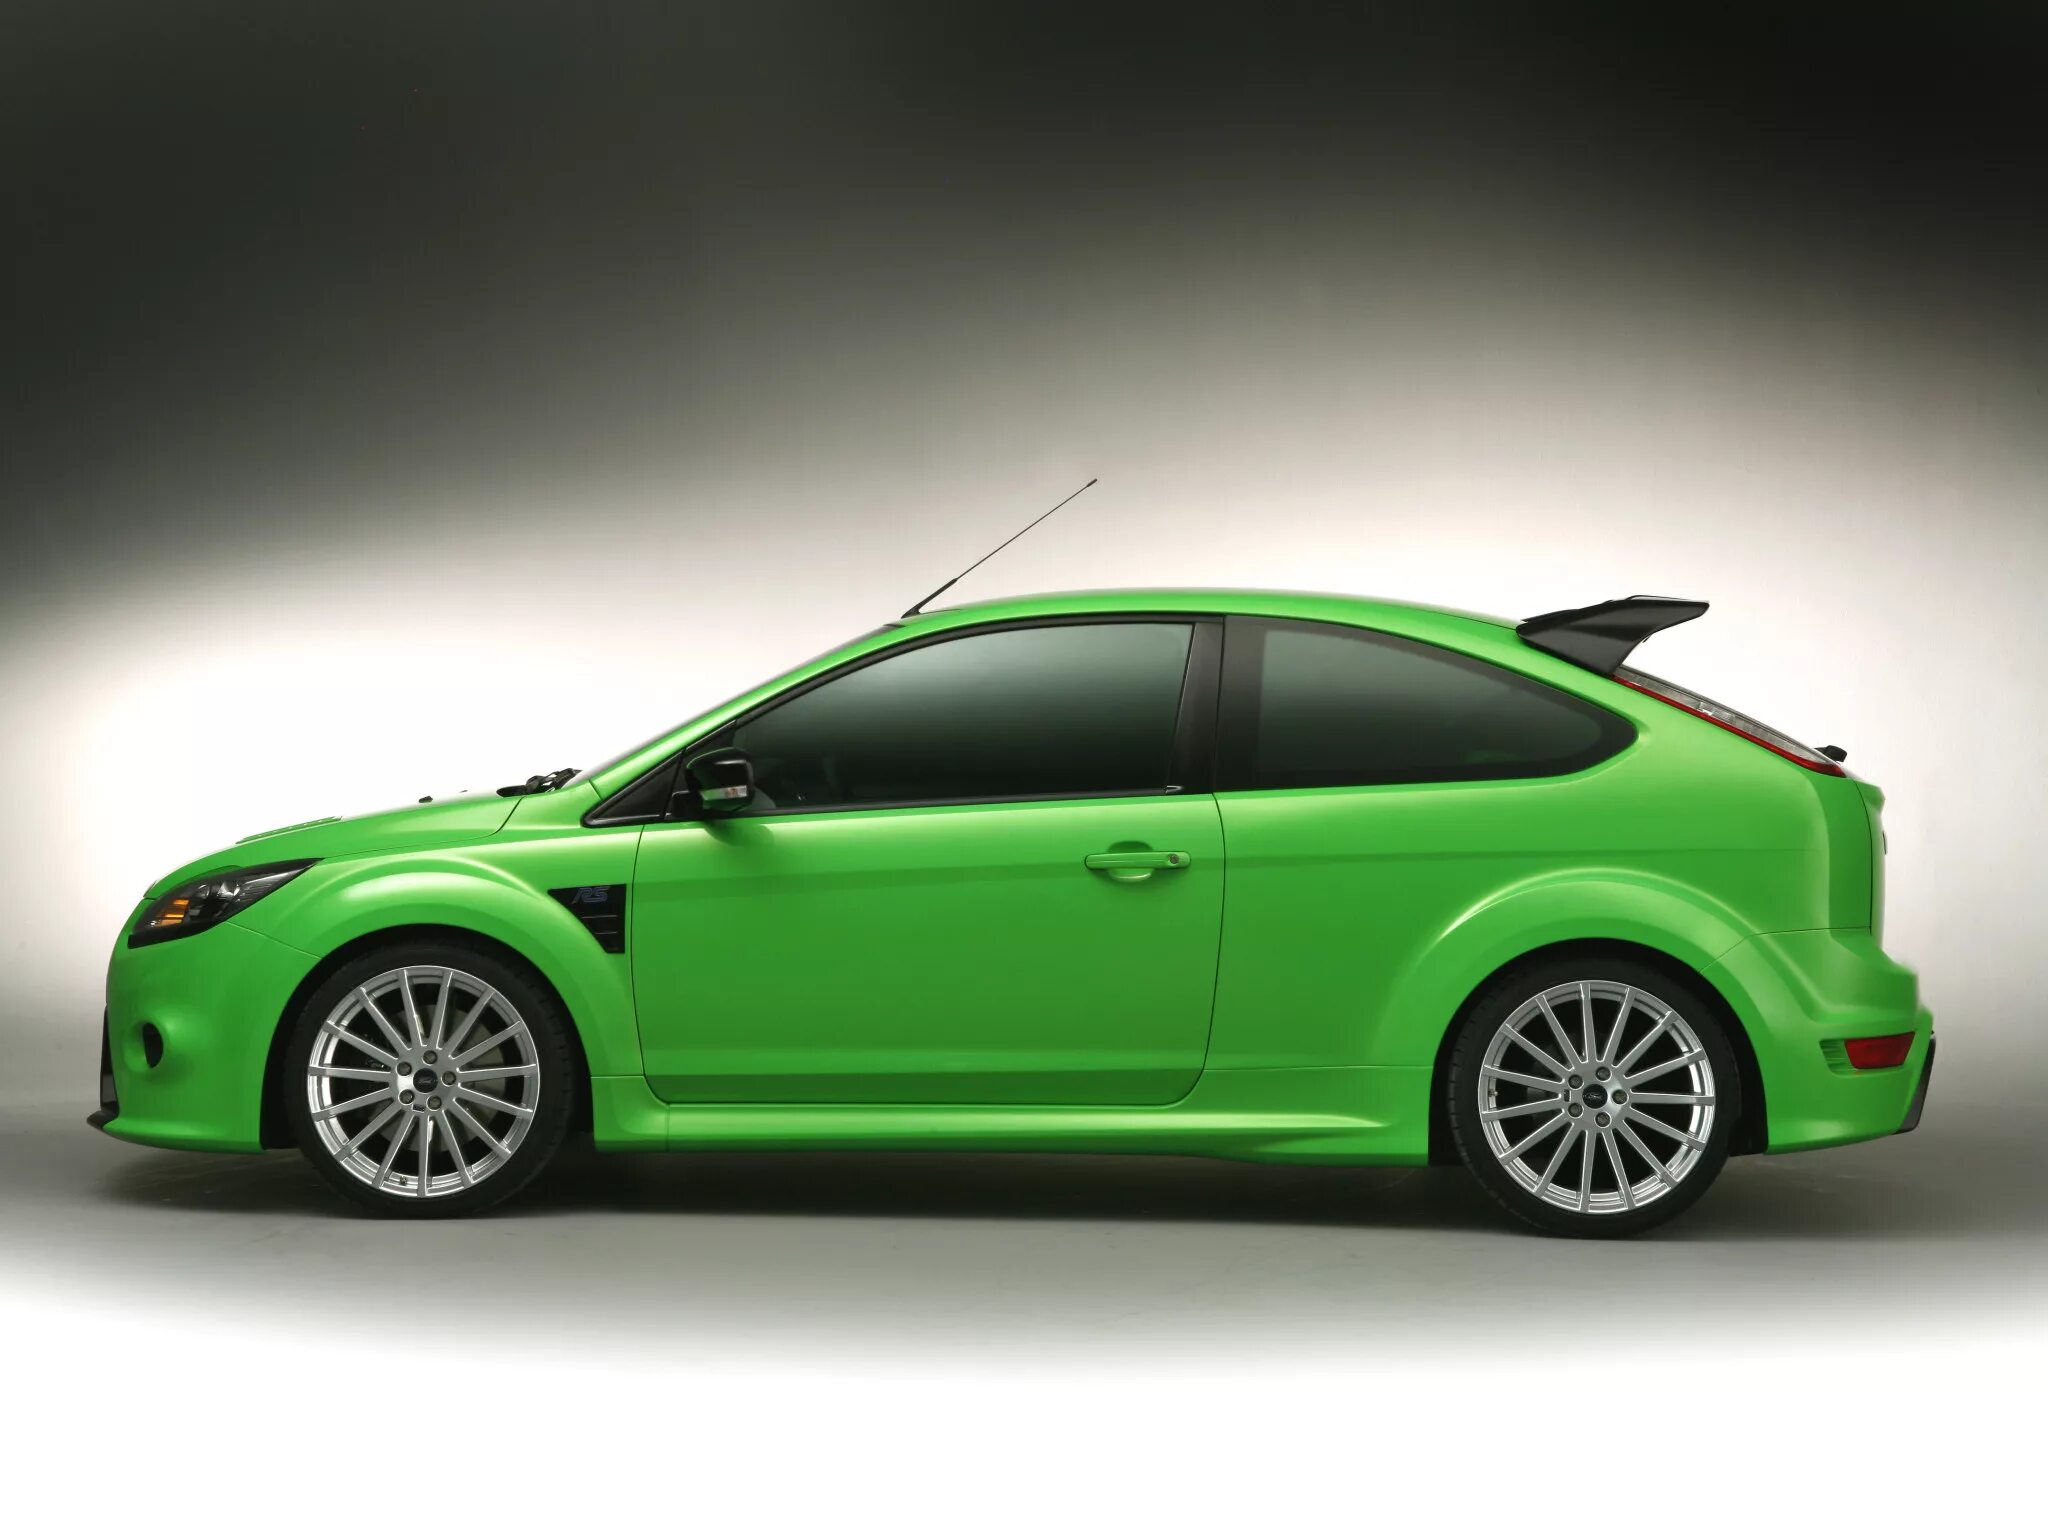 Форд фокус 2 RS. Ford Focus RS 2012. Форд фокус РС 2008. Ford Focus RS mk2. Фокус сот